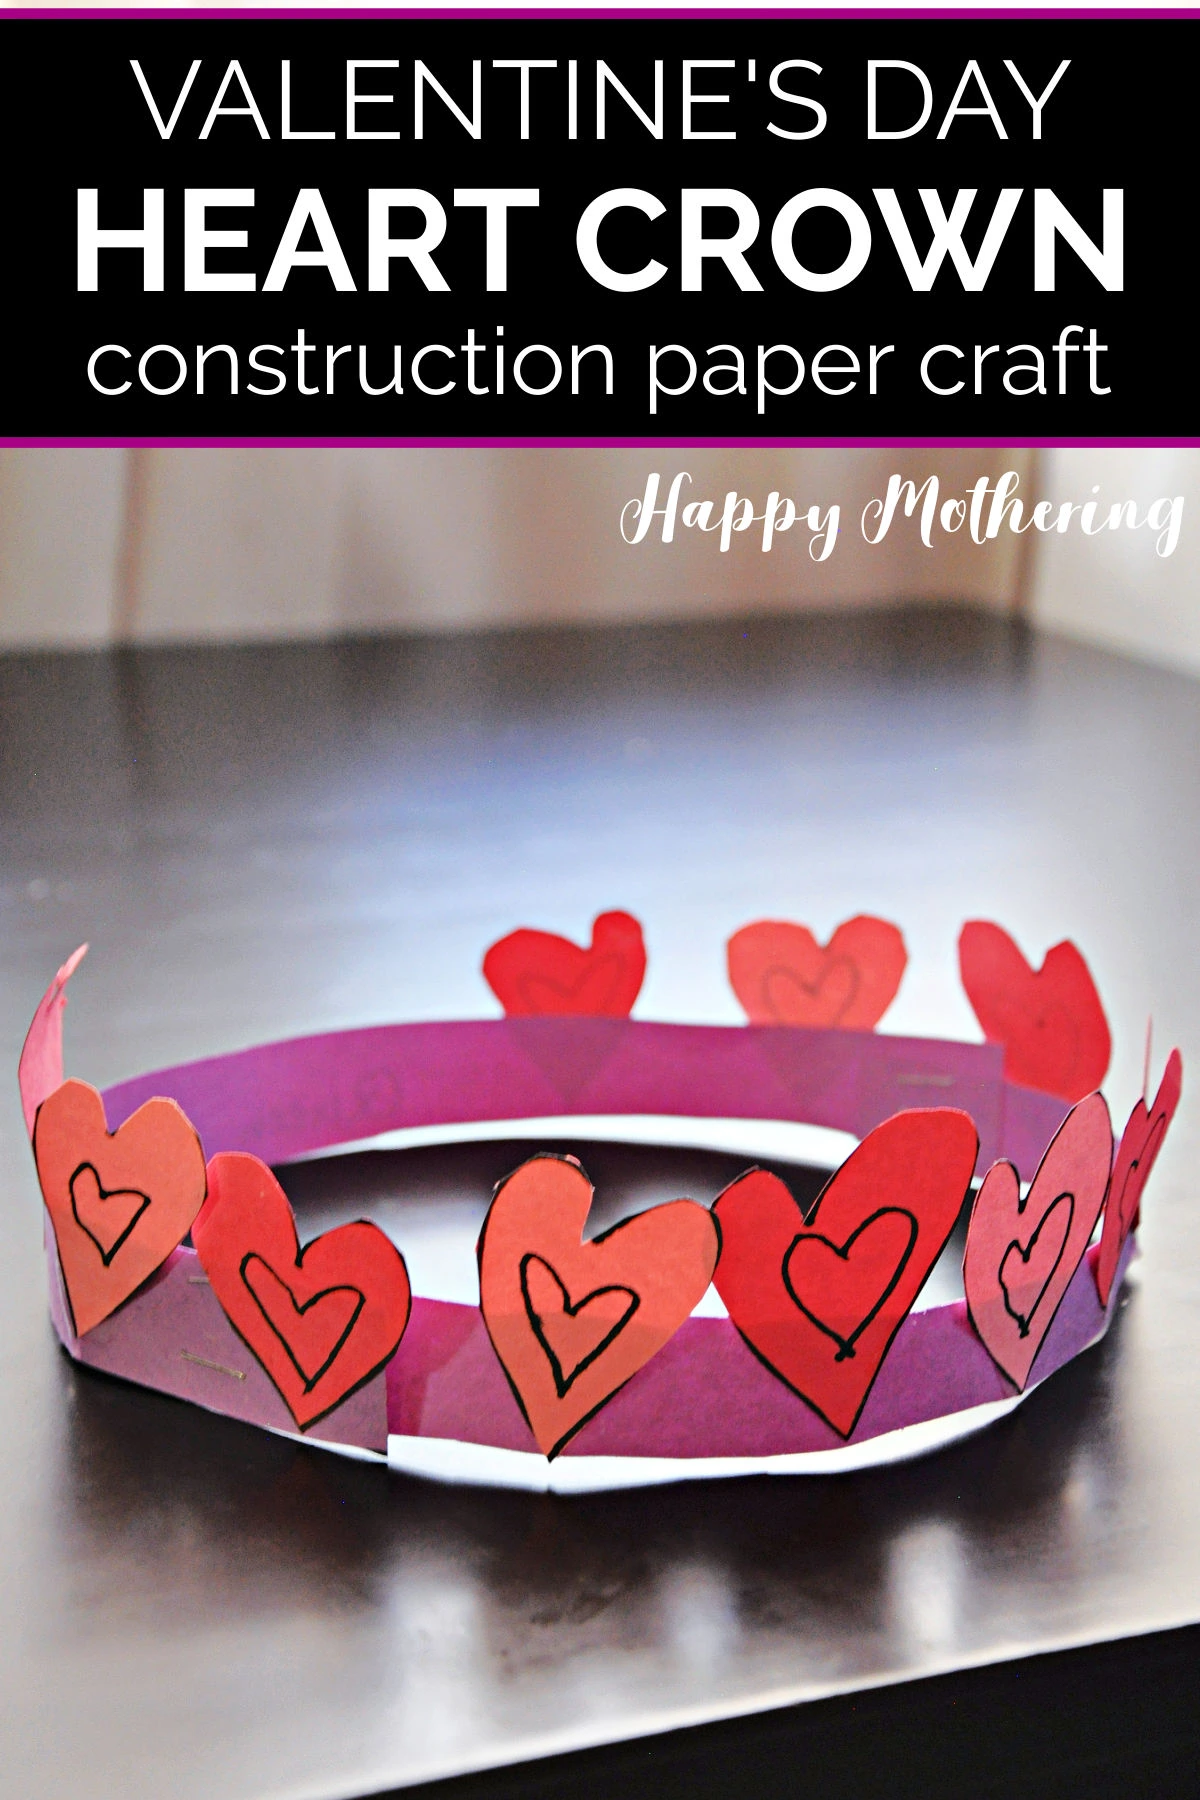 Crown of hearts made with construction paper for Valentines' Day